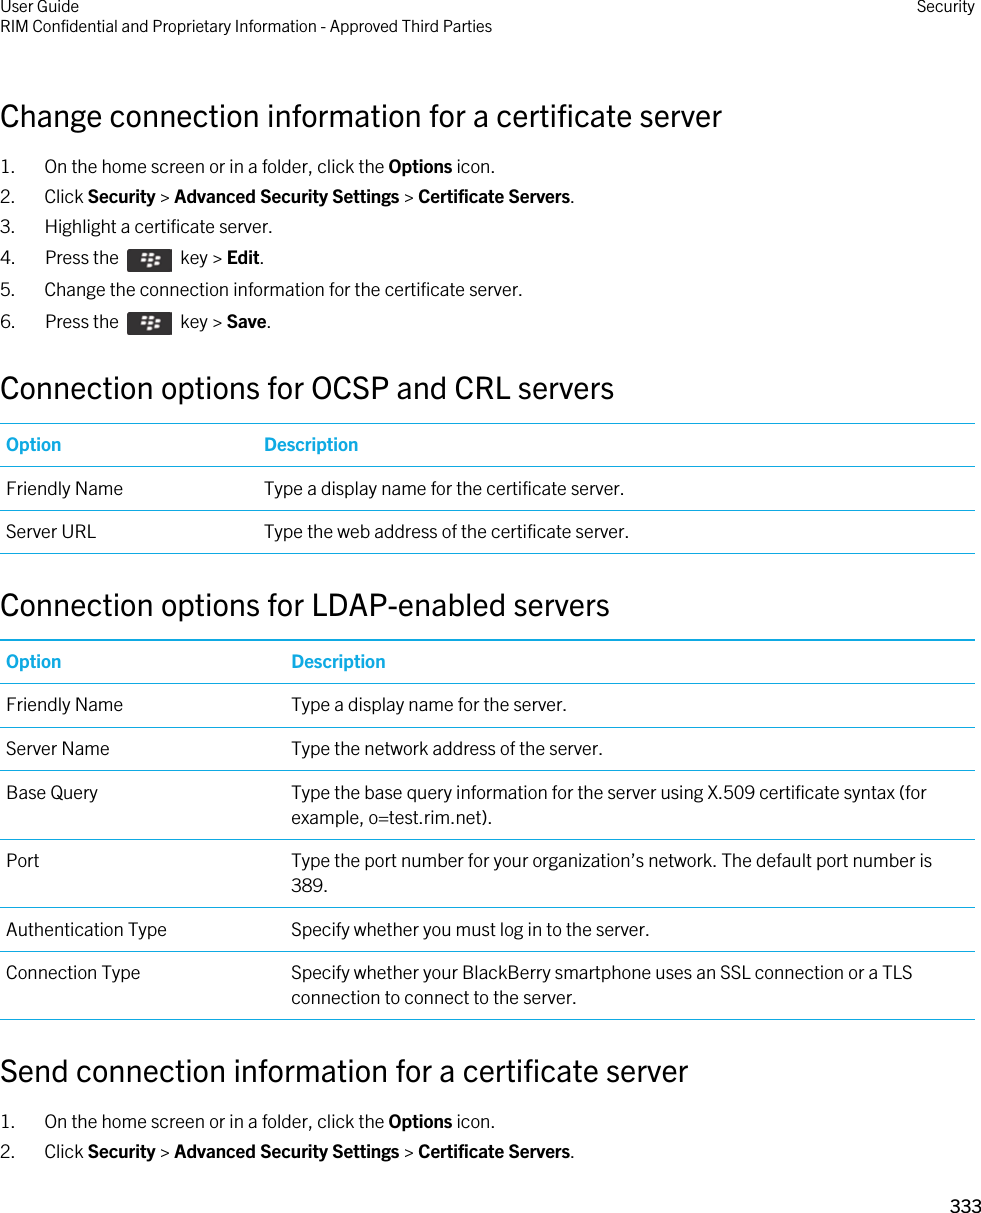 Change connection information for a certificate server1. On the home screen or in a folder, click the Options icon.2. Click Security &gt; Advanced Security Settings &gt; Certificate Servers.3. Highlight a certificate server.4.  Press the    key &gt; Edit. 5. Change the connection information for the certificate server.6.  Press the    key &gt; Save. Connection options for OCSP and CRL serversOption DescriptionFriendly Name Type a display name for the certificate server.Server URL Type the web address of the certificate server.Connection options for LDAP-enabled serversOption DescriptionFriendly Name Type a display name for the server.Server Name Type the network address of the server.Base Query Type the base query information for the server using X.509 certificate syntax (for example, o=test.rim.net).Port Type the port number for your organization’s network. The default port number is 389.Authentication Type Specify whether you must log in to the server.Connection Type Specify whether your BlackBerry smartphone uses an SSL connection or a TLS connection to connect to the server.Send connection information for a certificate server1. On the home screen or in a folder, click the Options icon.2. Click Security &gt; Advanced Security Settings &gt; Certificate Servers.User GuideRIM Confidential and Proprietary Information - Approved Third Parties Security333 